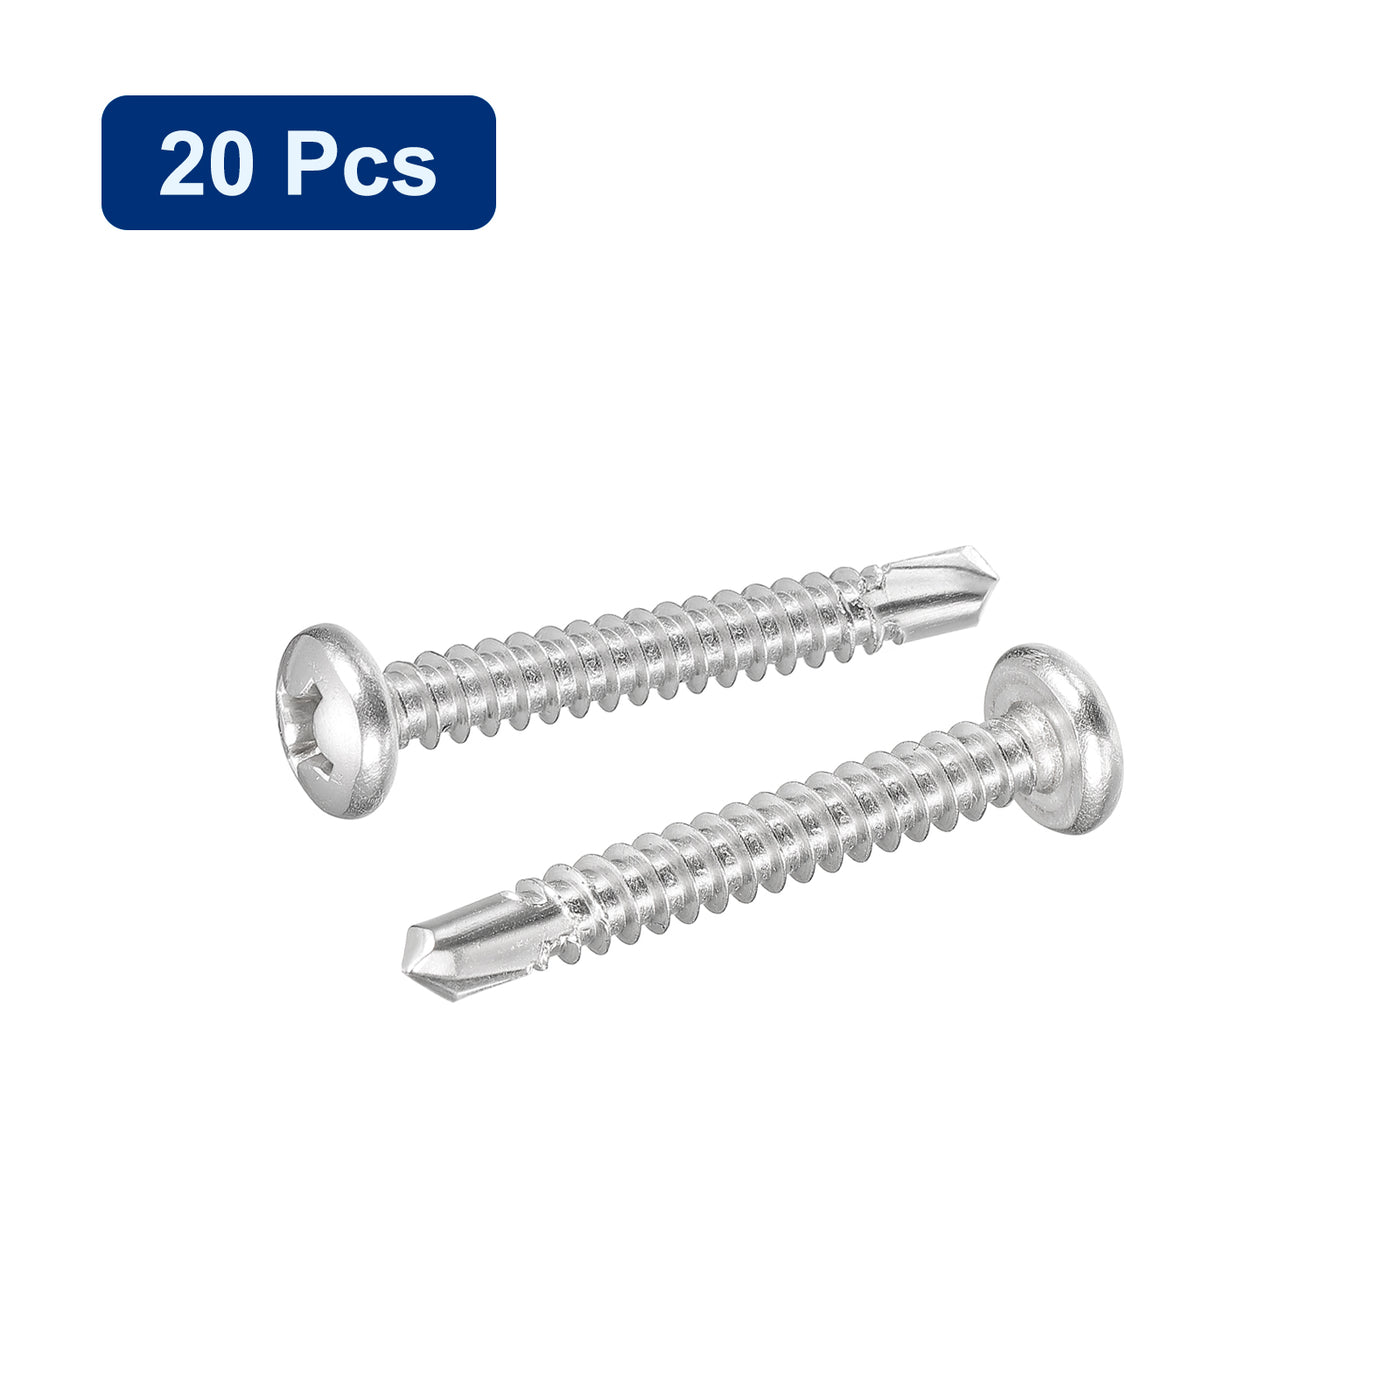 uxcell Uxcell #12 x 1-1/2" Self Drilling Screws, 20pcs Phillips Pan Head Self Tapping Screws